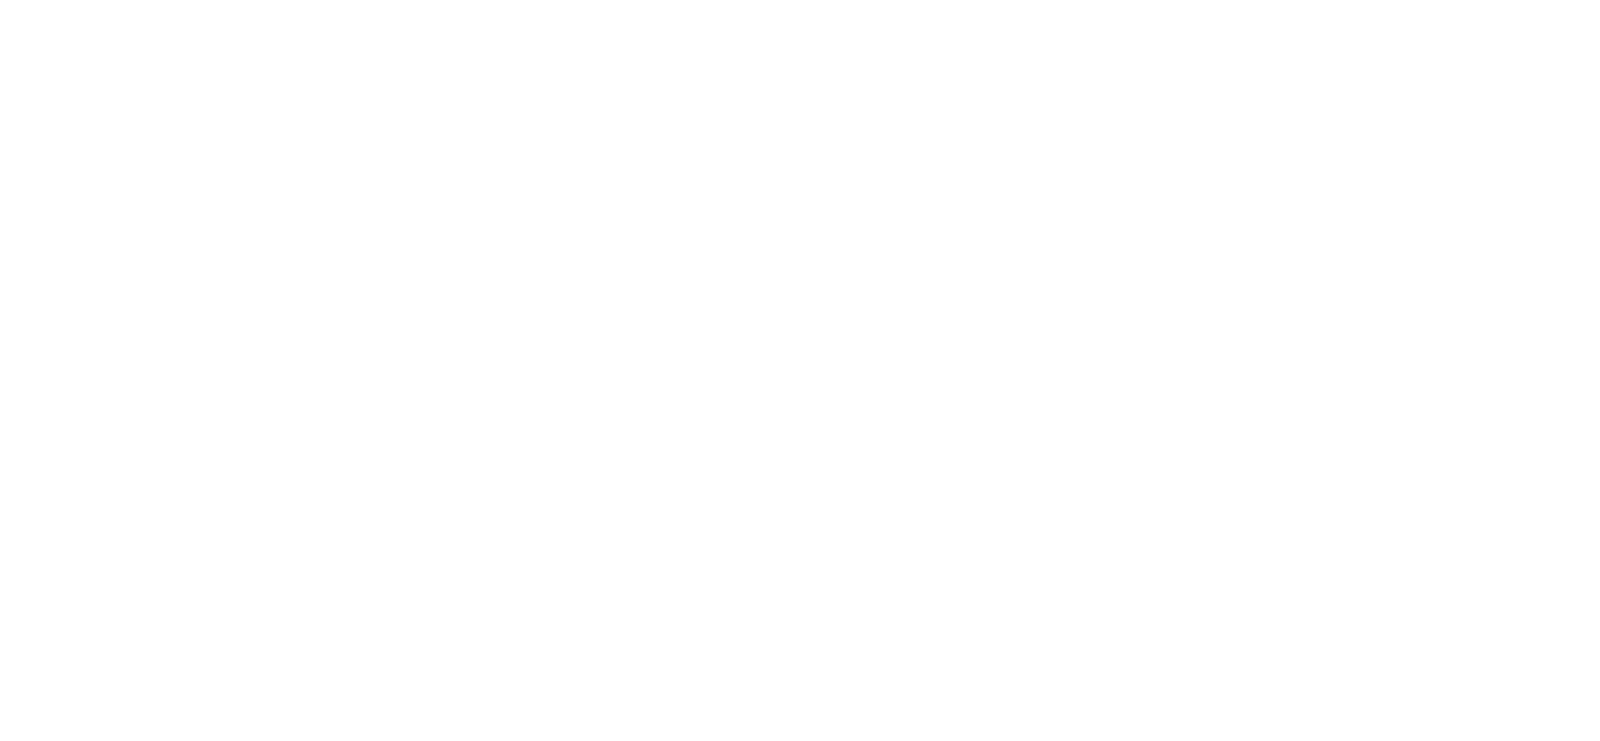 Hong Kong Exchanges & Clearing logo grand pour les fonds sombres (PNG transparent)